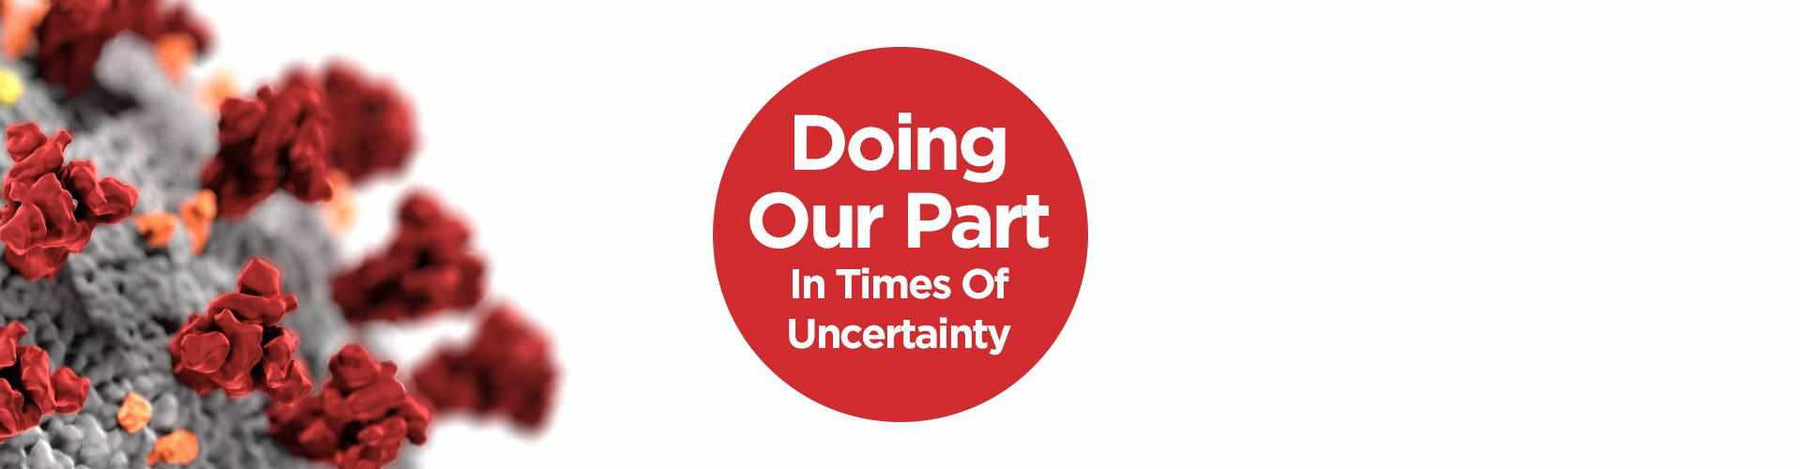 Doing Our Part in Times of Uncertainty -  - BlackboxMyCar Canada